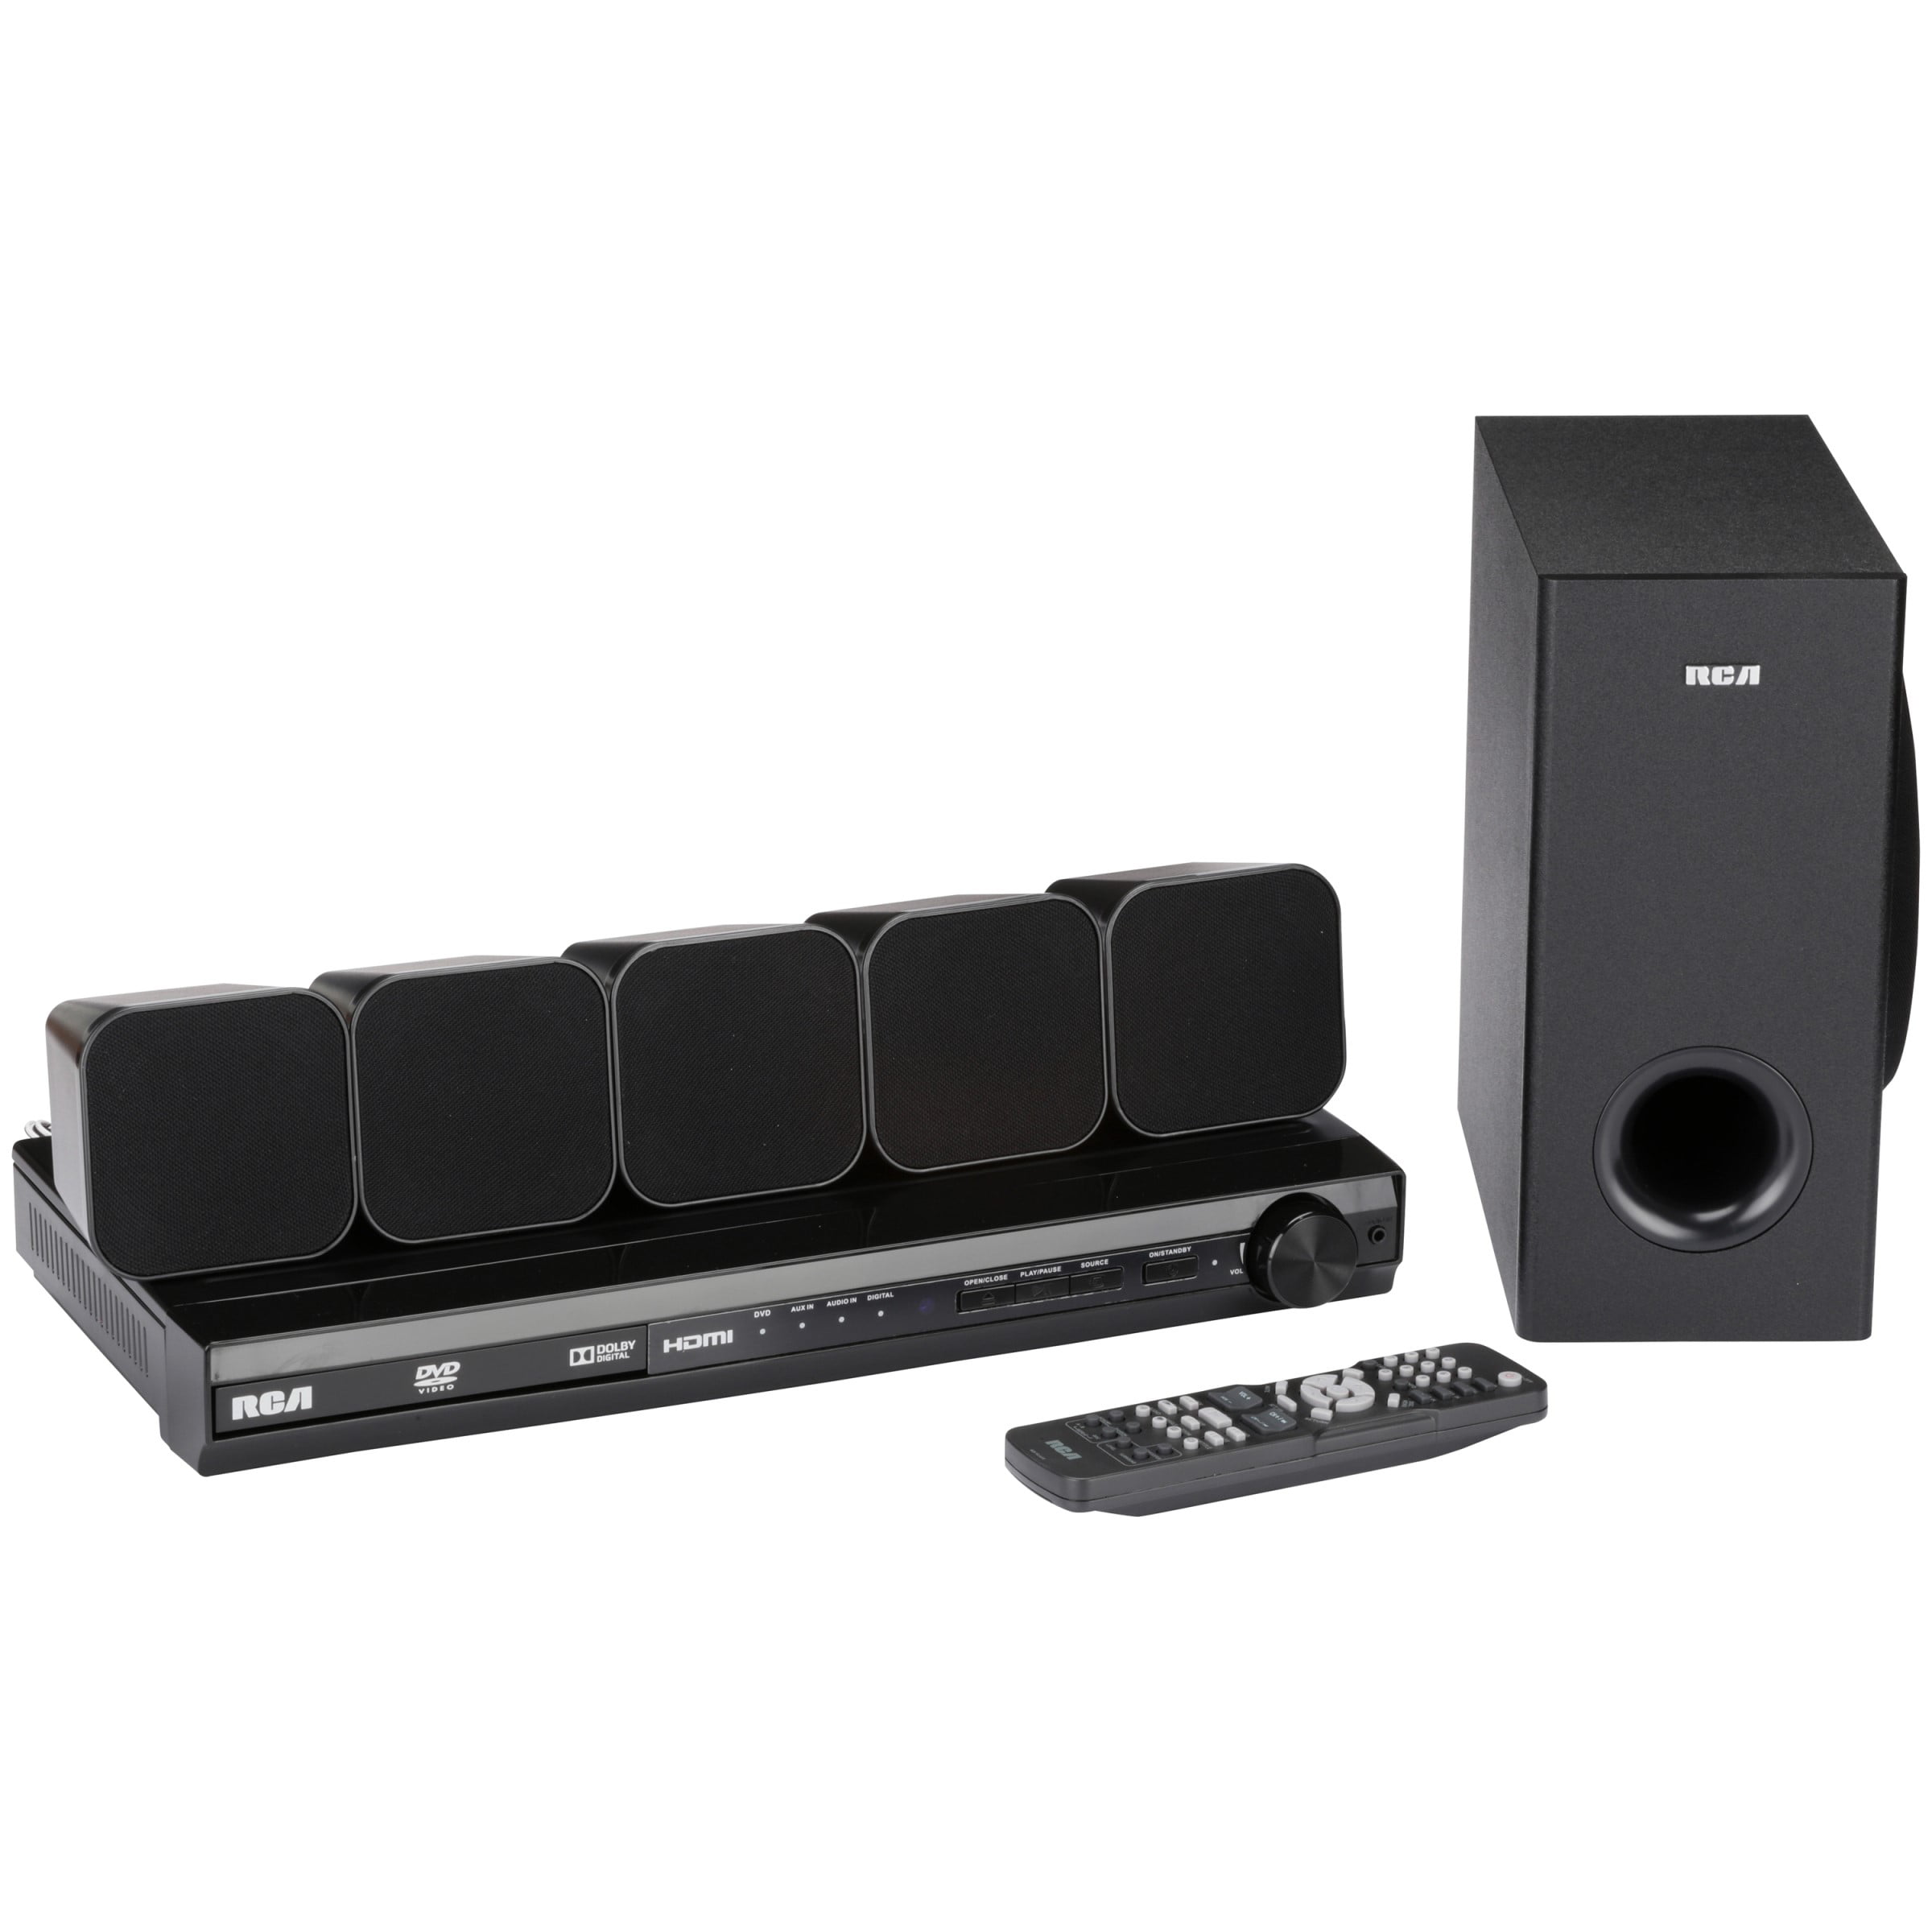 Overleven kleding Demon Play RCA DVD Home Theater System with HDMI 1080p Output 8 pc Box - Walmart.com